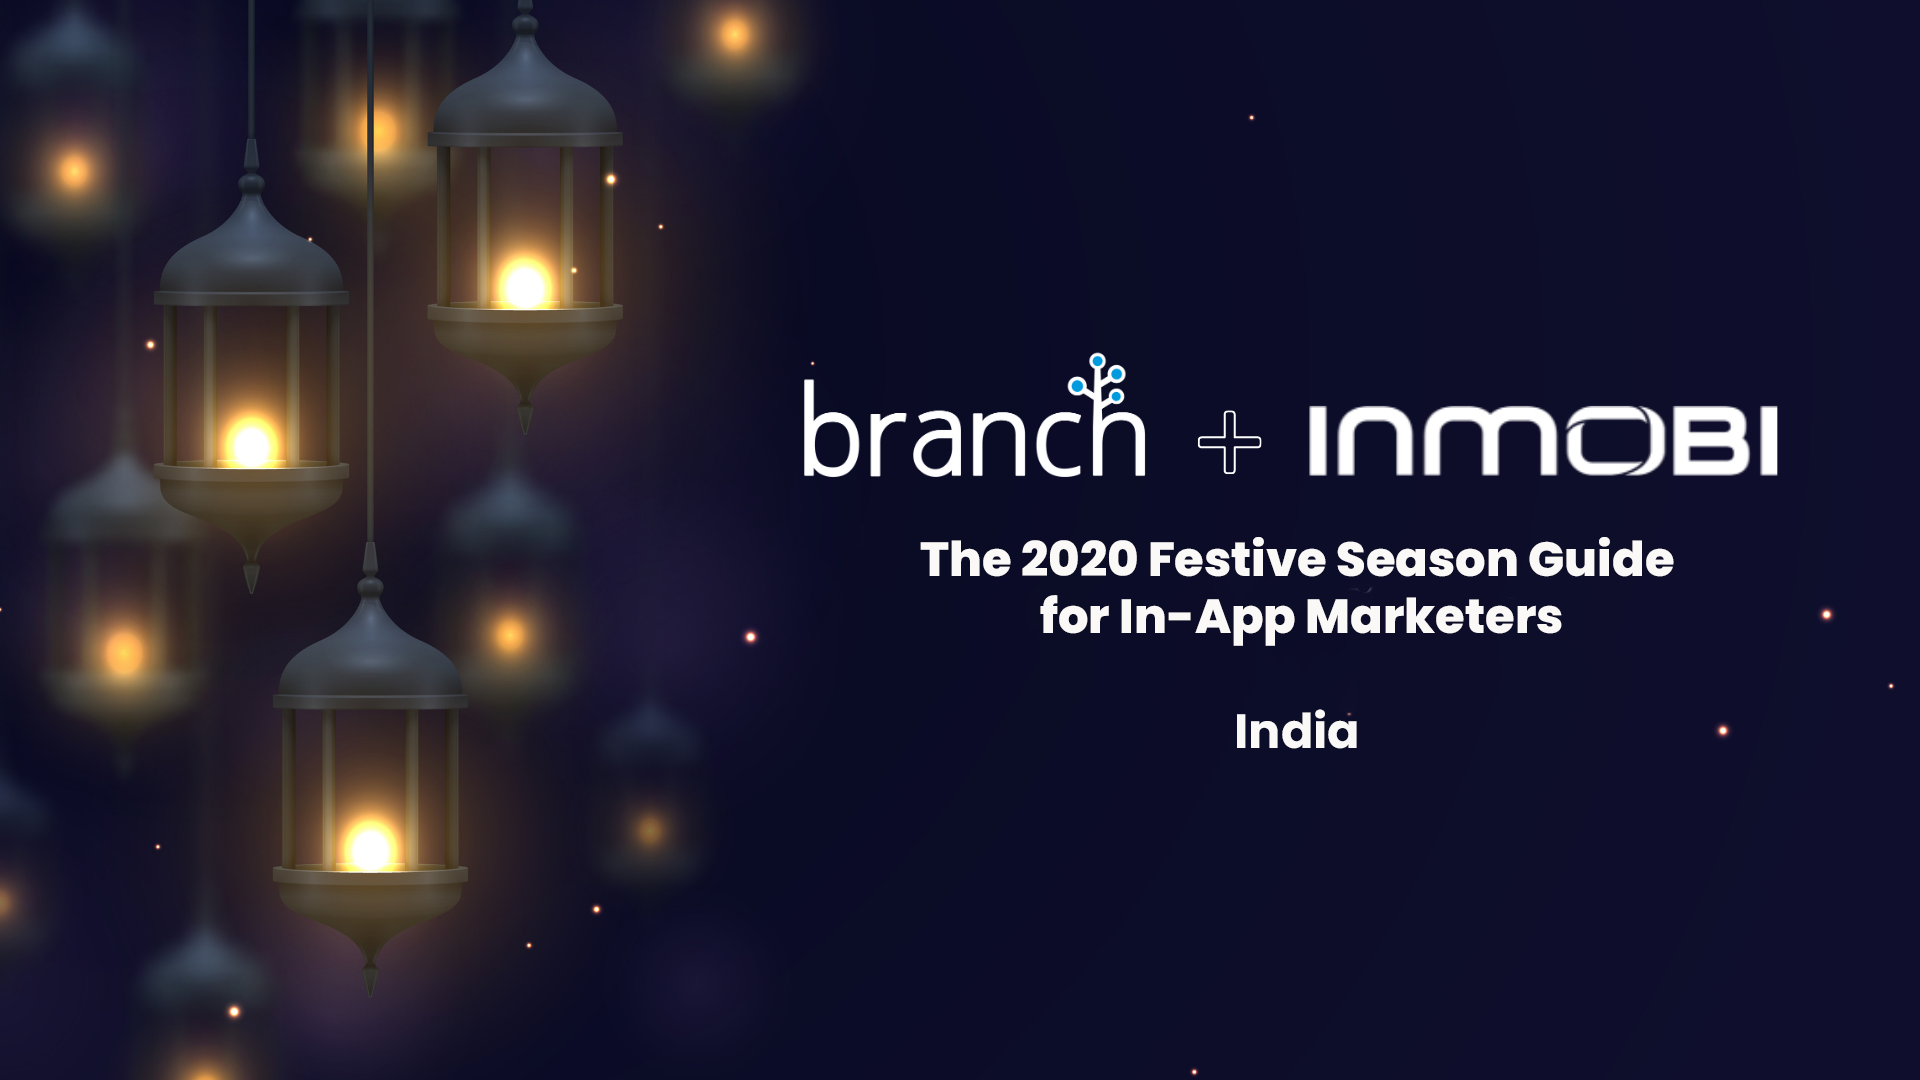 The Festive Season Guide for In-App Marketers | 2020